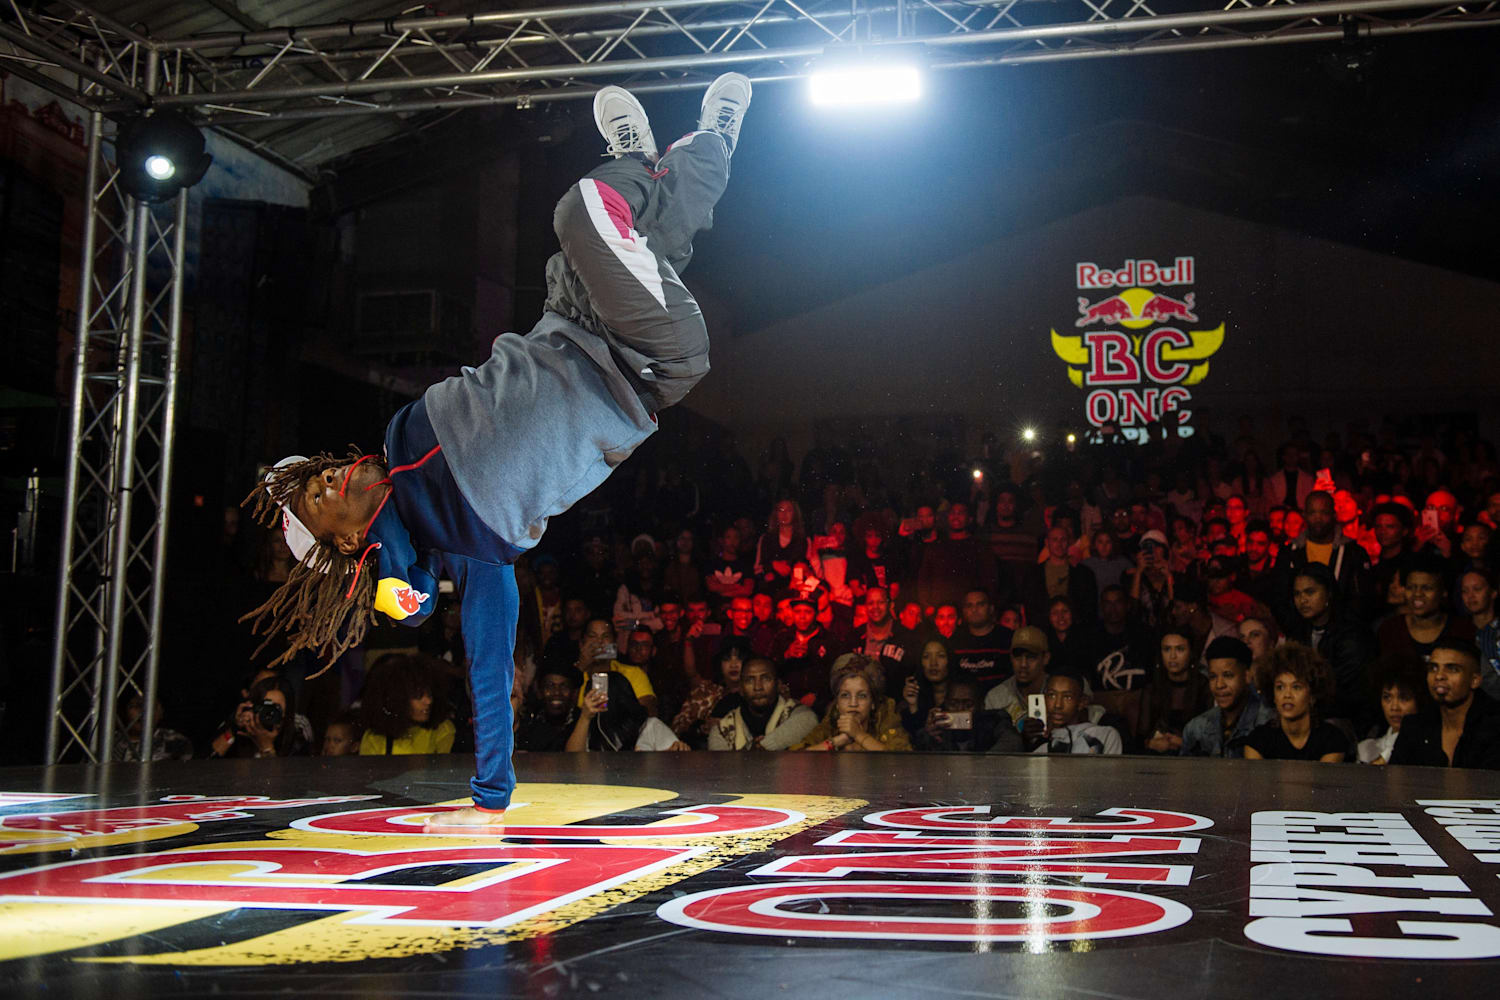 Red Bull BC One Cypher Cape Town 2019 image gallery